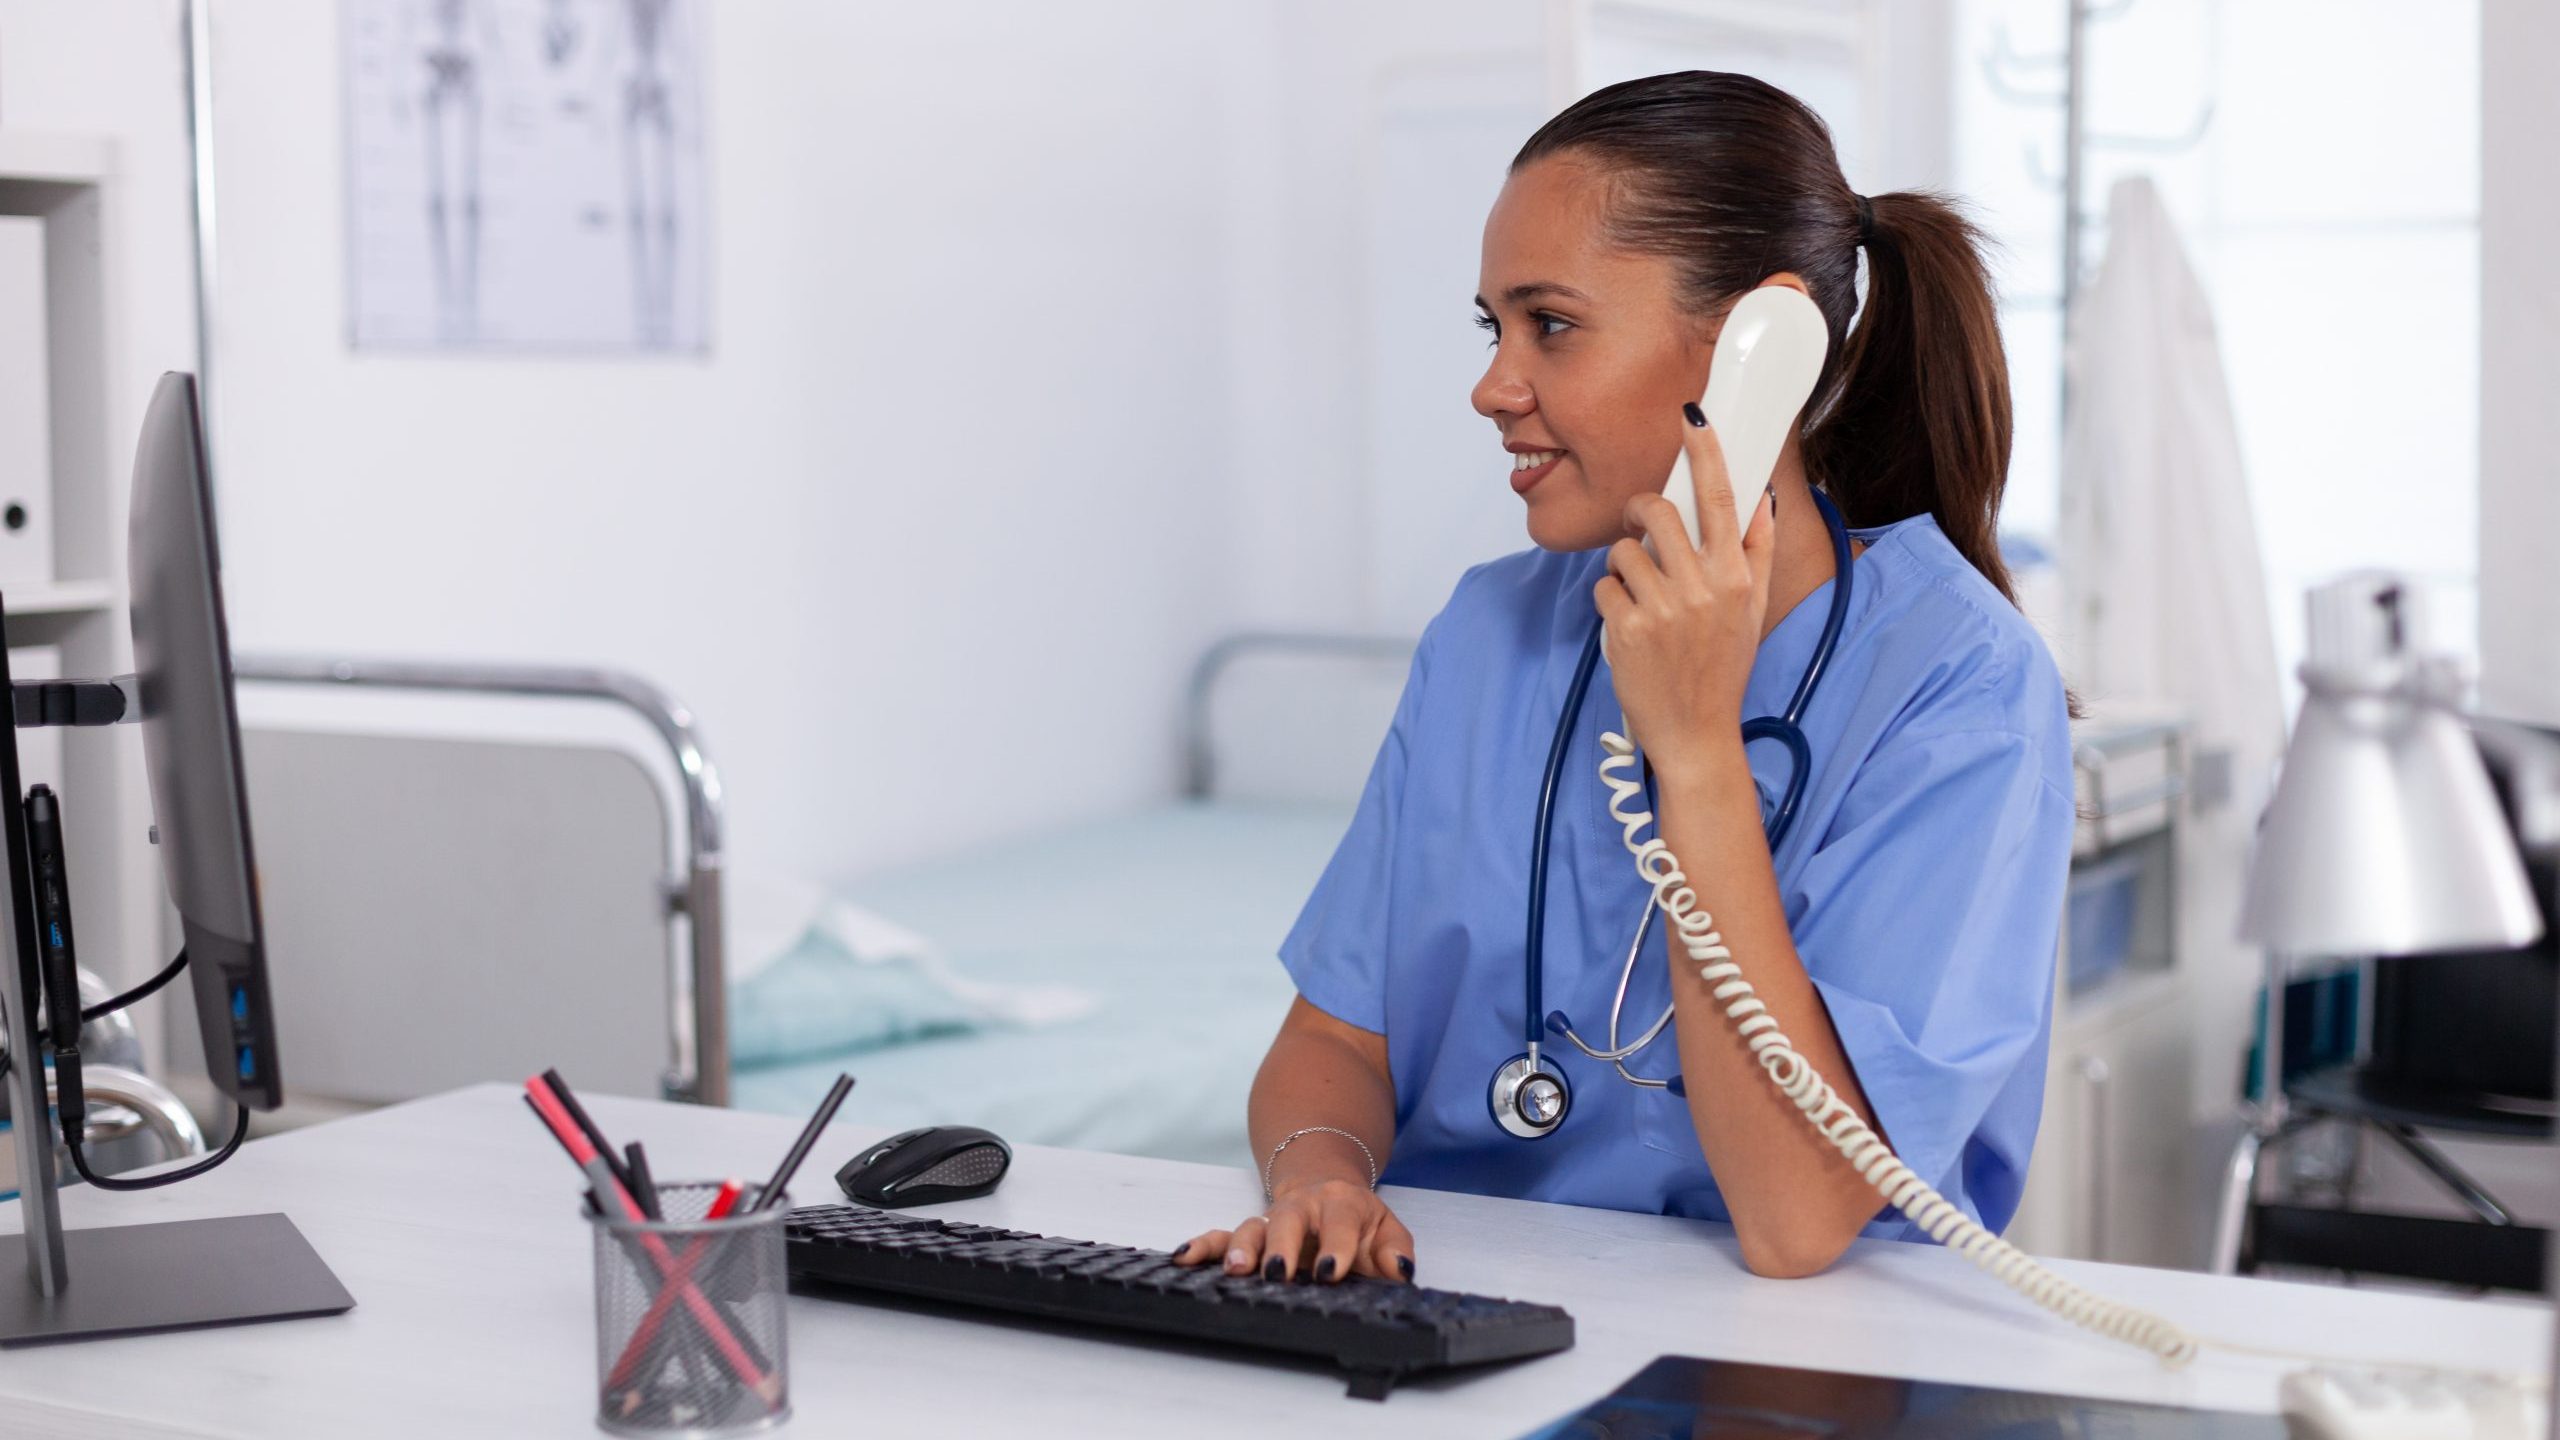 Stock photo of nurse sitting at desk and talking on phone